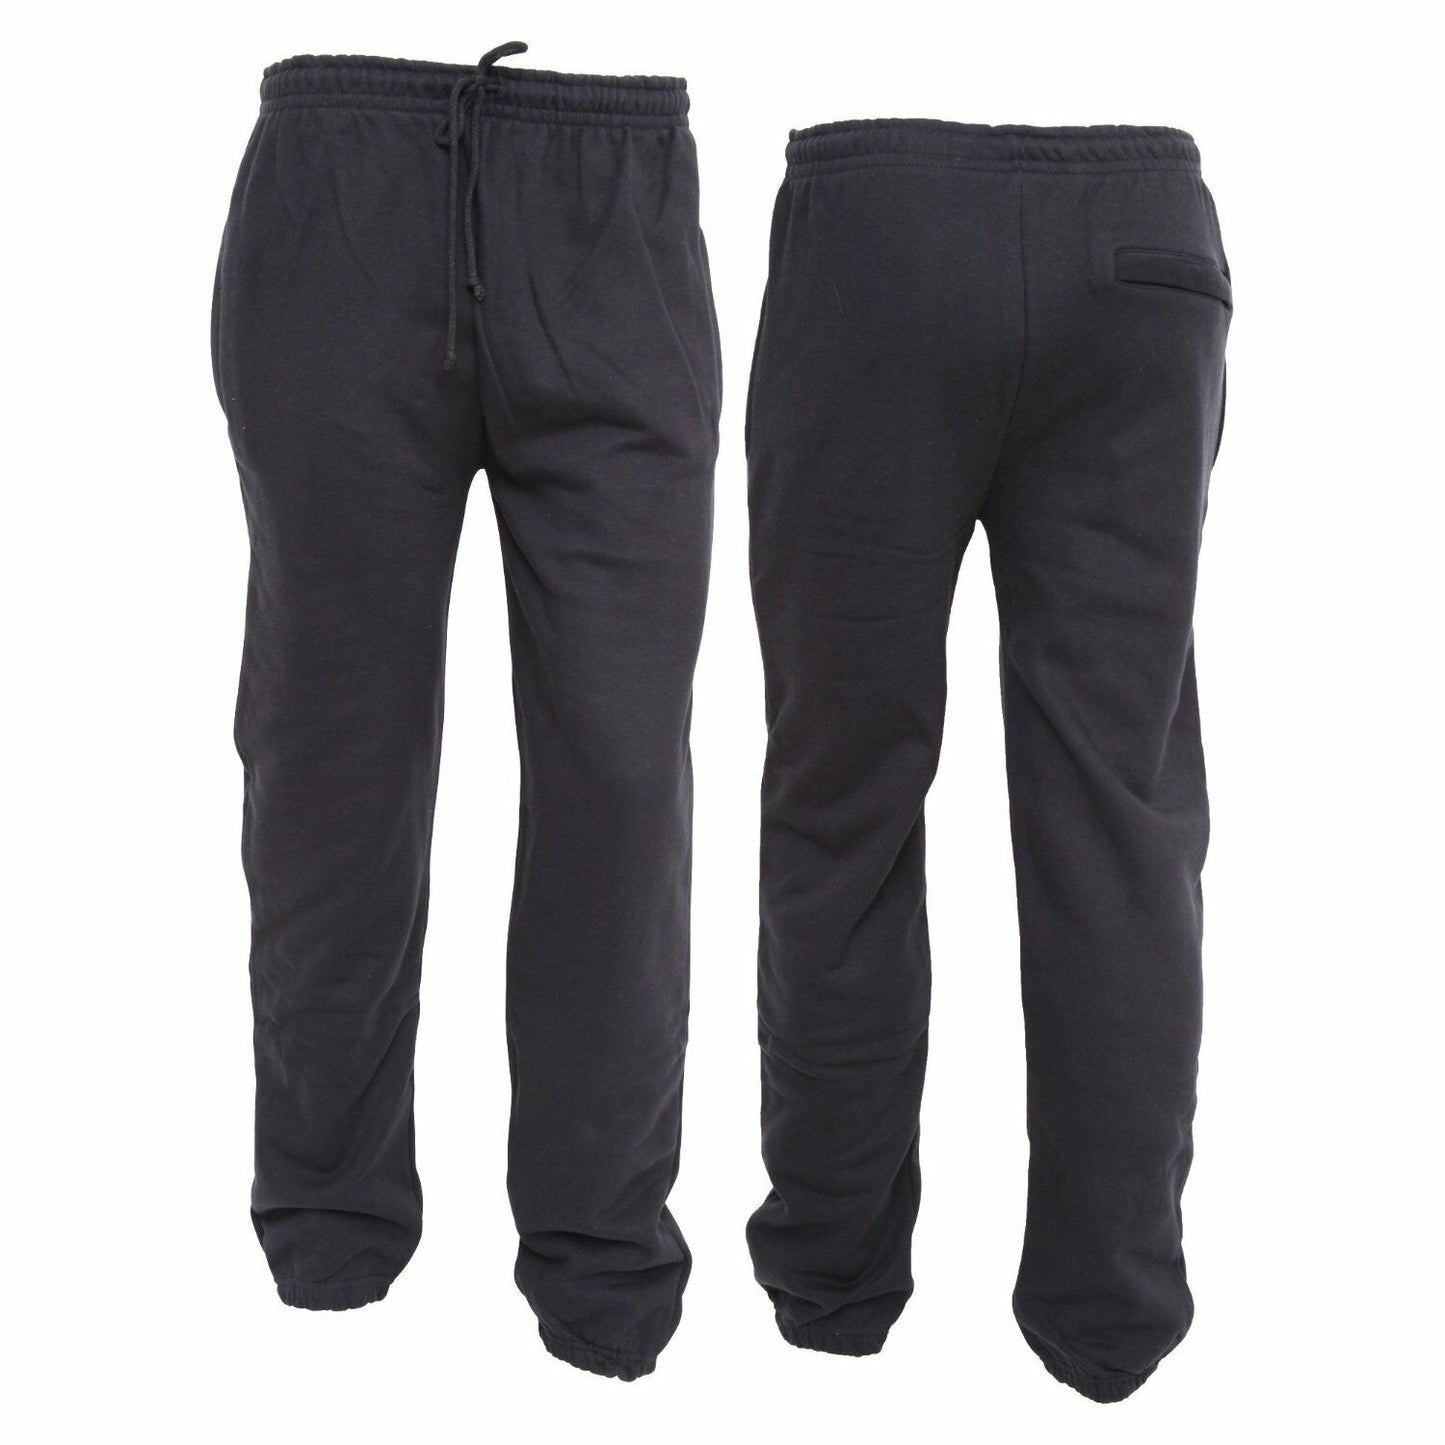 Men's Jogging Bottoms In Navy With Elasticated Ankles & Waist. The Waist Has A Drawstring Fastening Also. Sizes Start At Medium And Go To A X-Large.